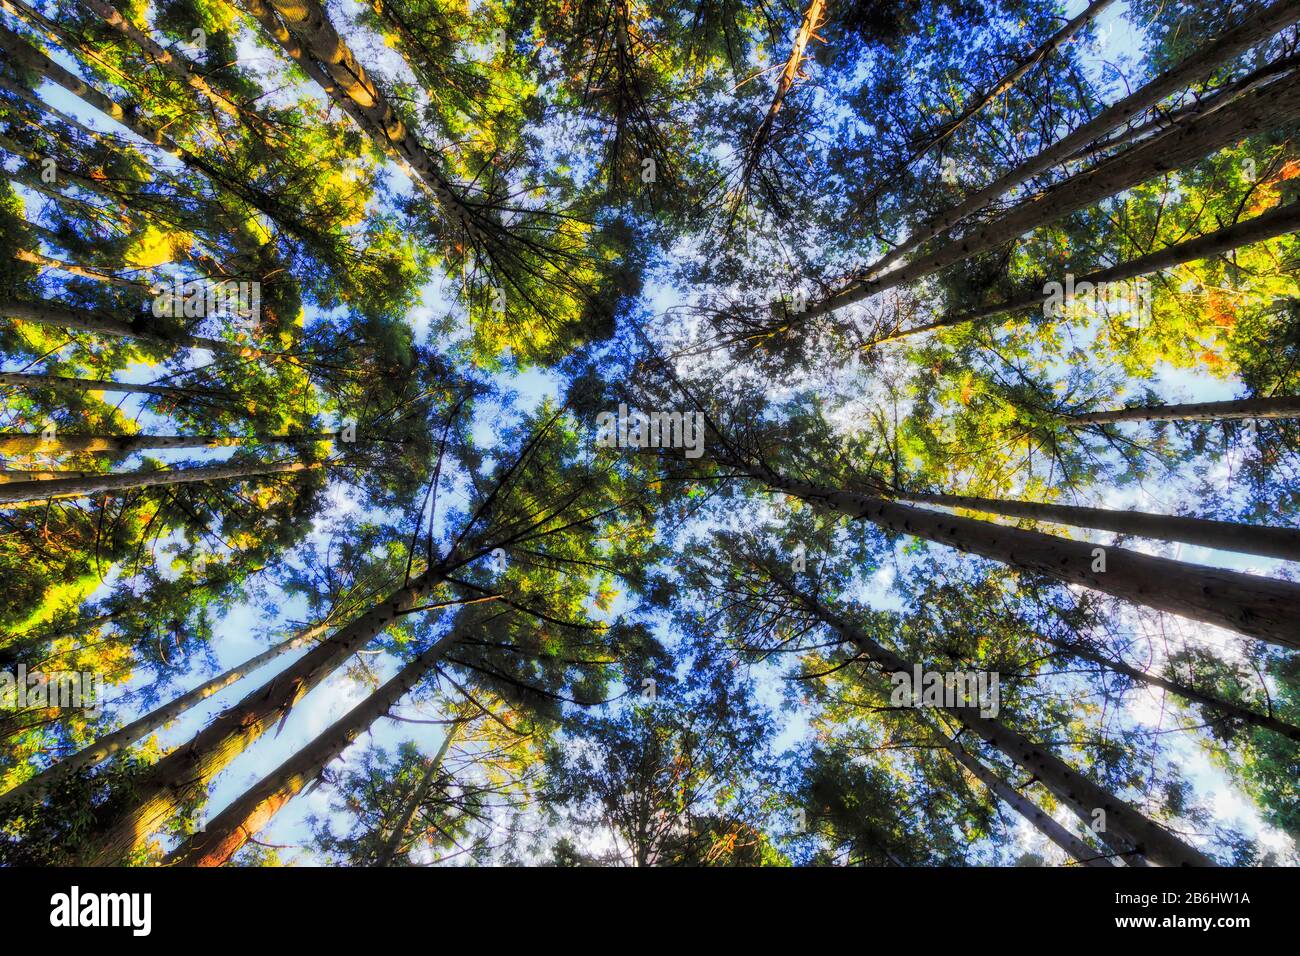 Bottom up view from ground along straight tall trunks of pine trees to blue sky through green crowns. Stock Photo